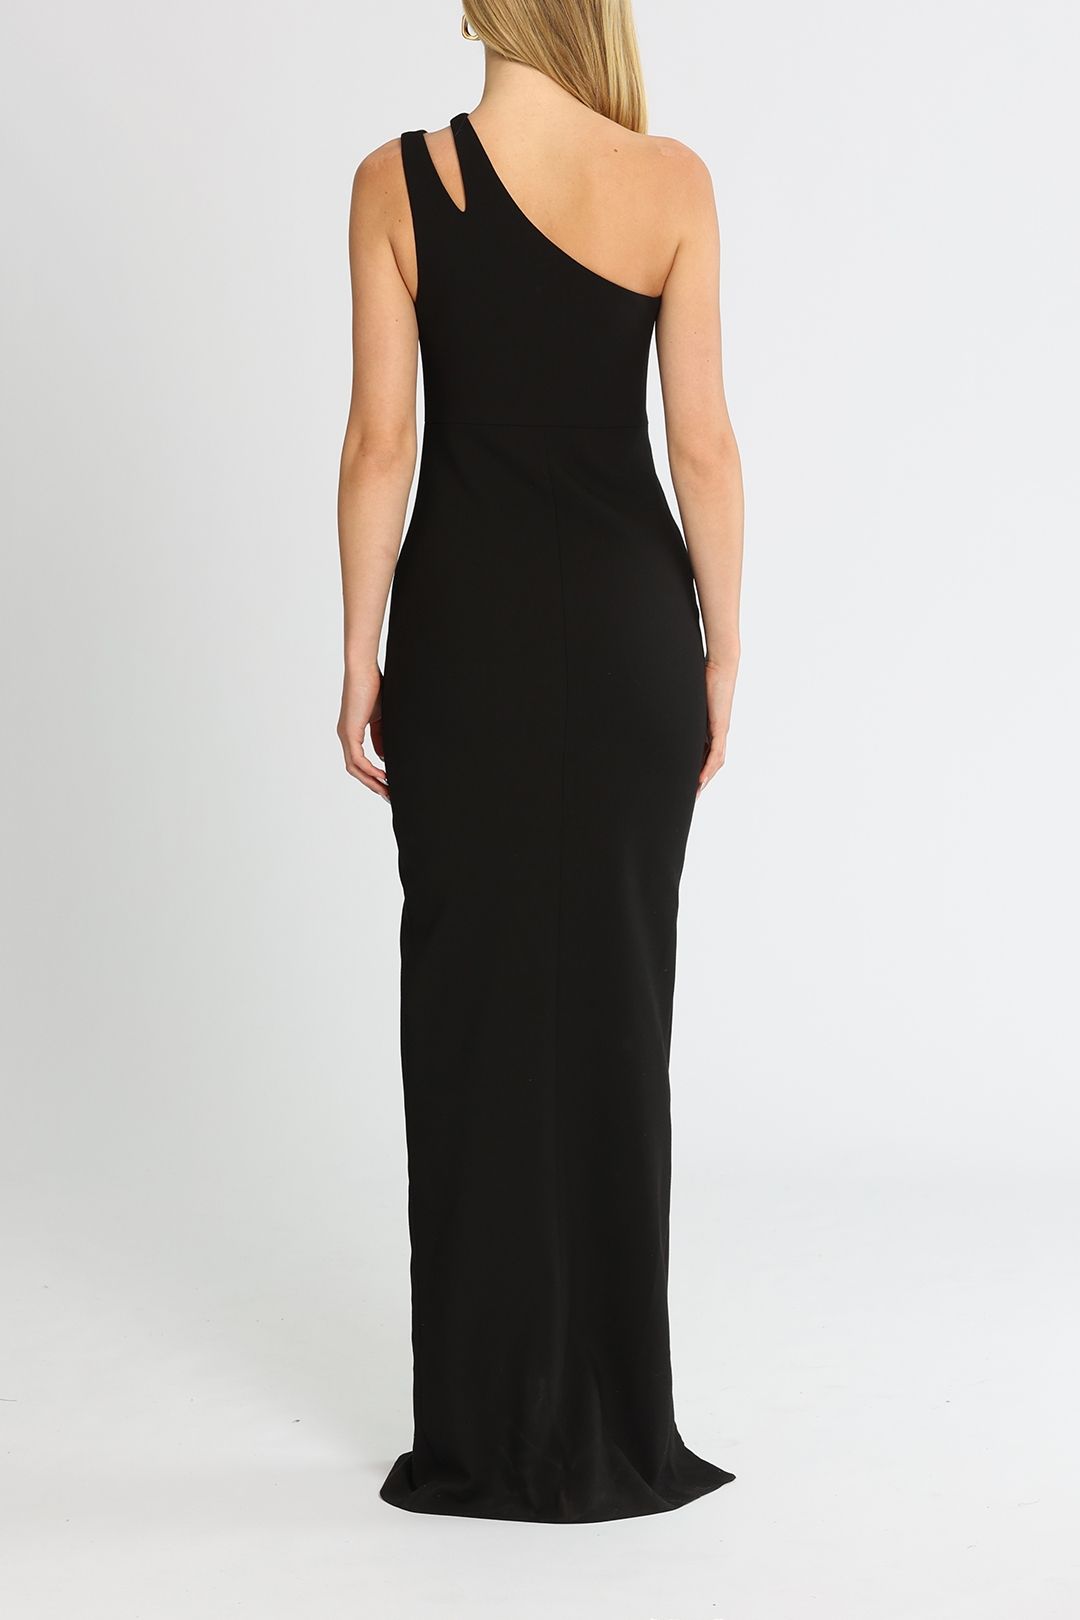 Likely NYC Roxy Gown Floor Length